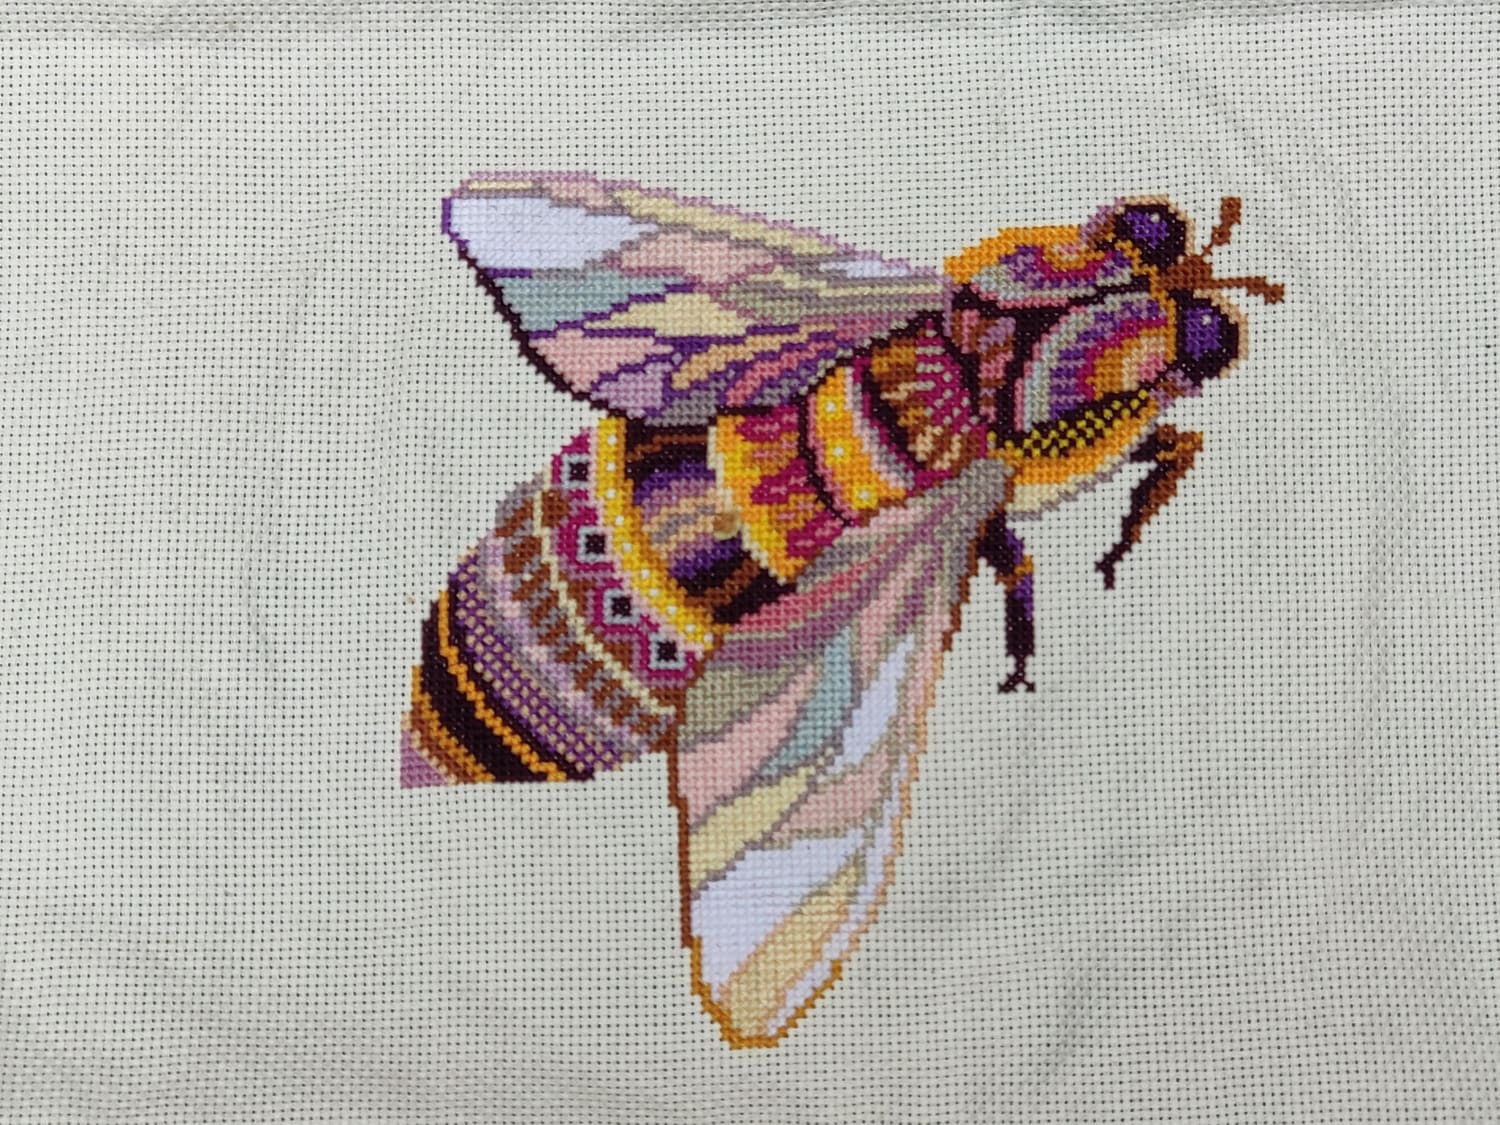 [FO] I started my beekeeping adventure in June and this piece in August. While WIP I stitched it while my beekeeping school integration evenings. This is my first mandala.